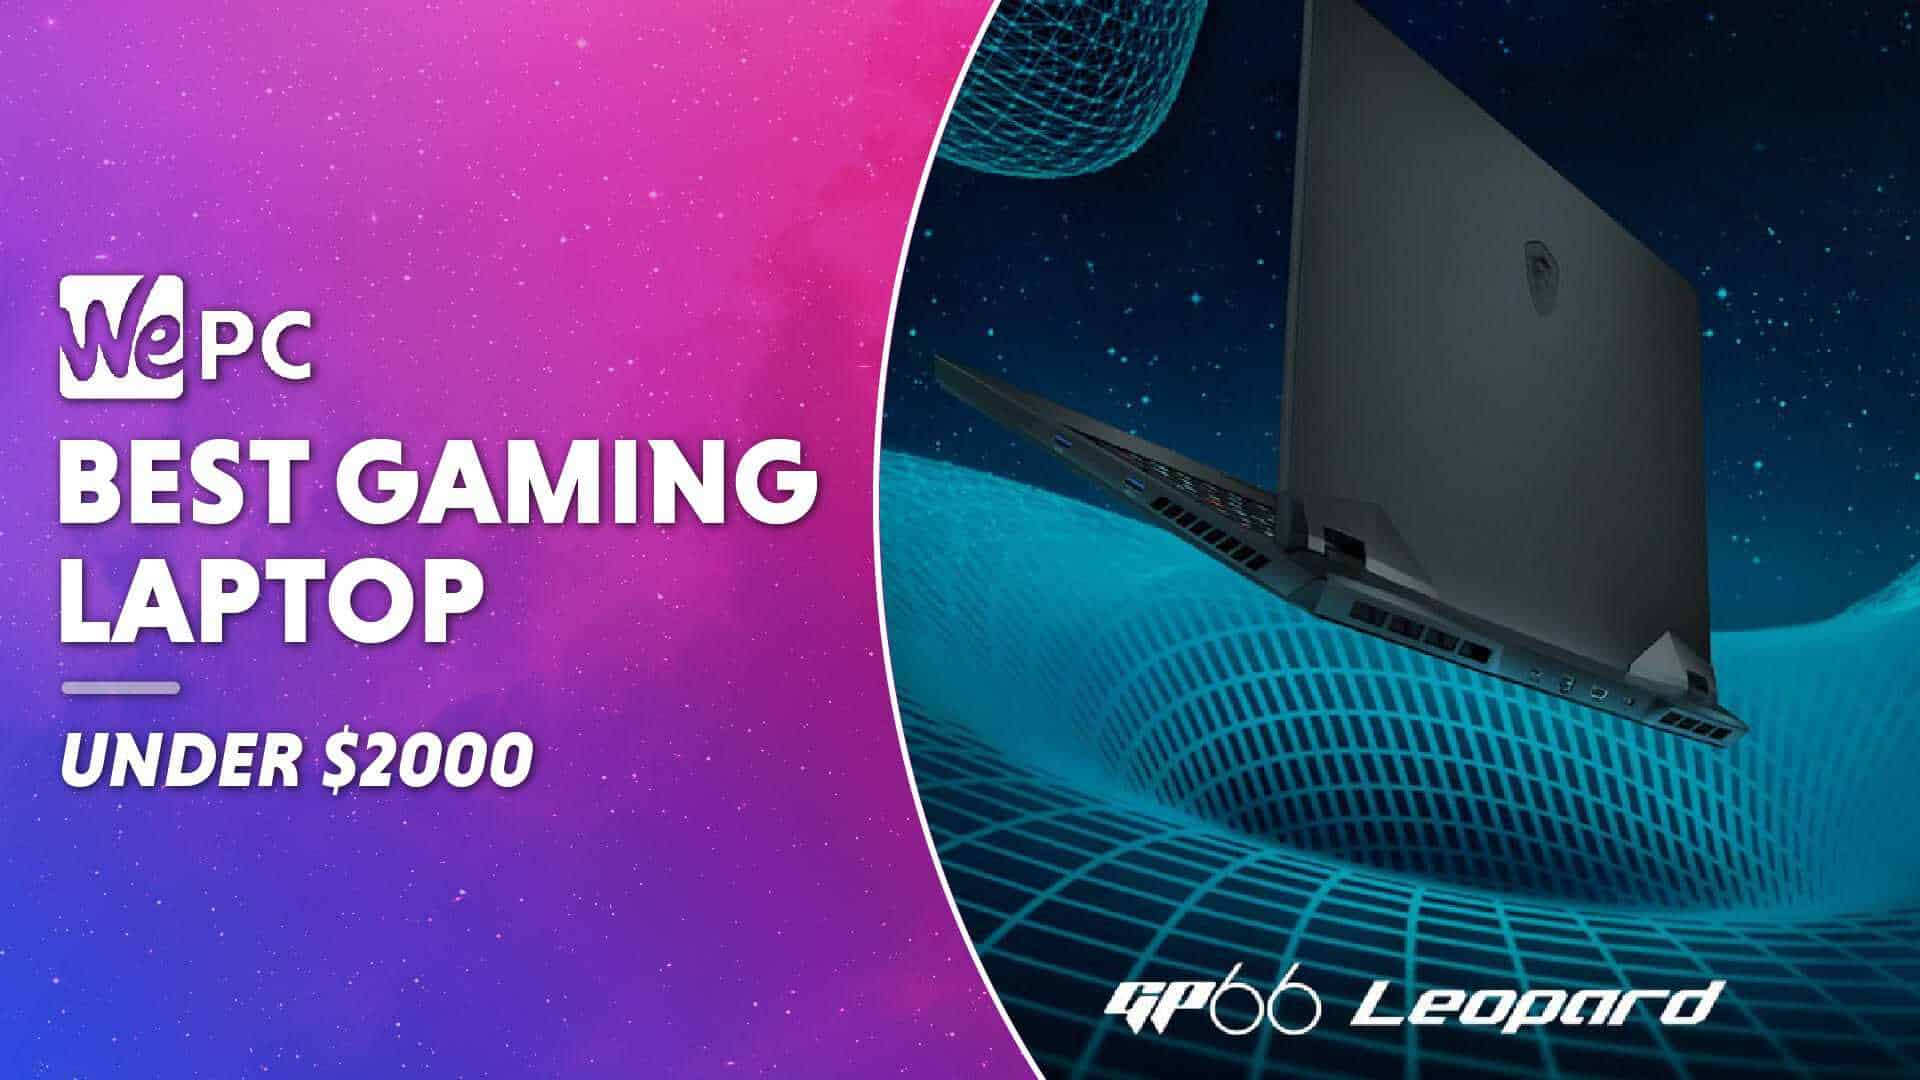 What is the Best Gaming Laptop under 2000 Dollars? 